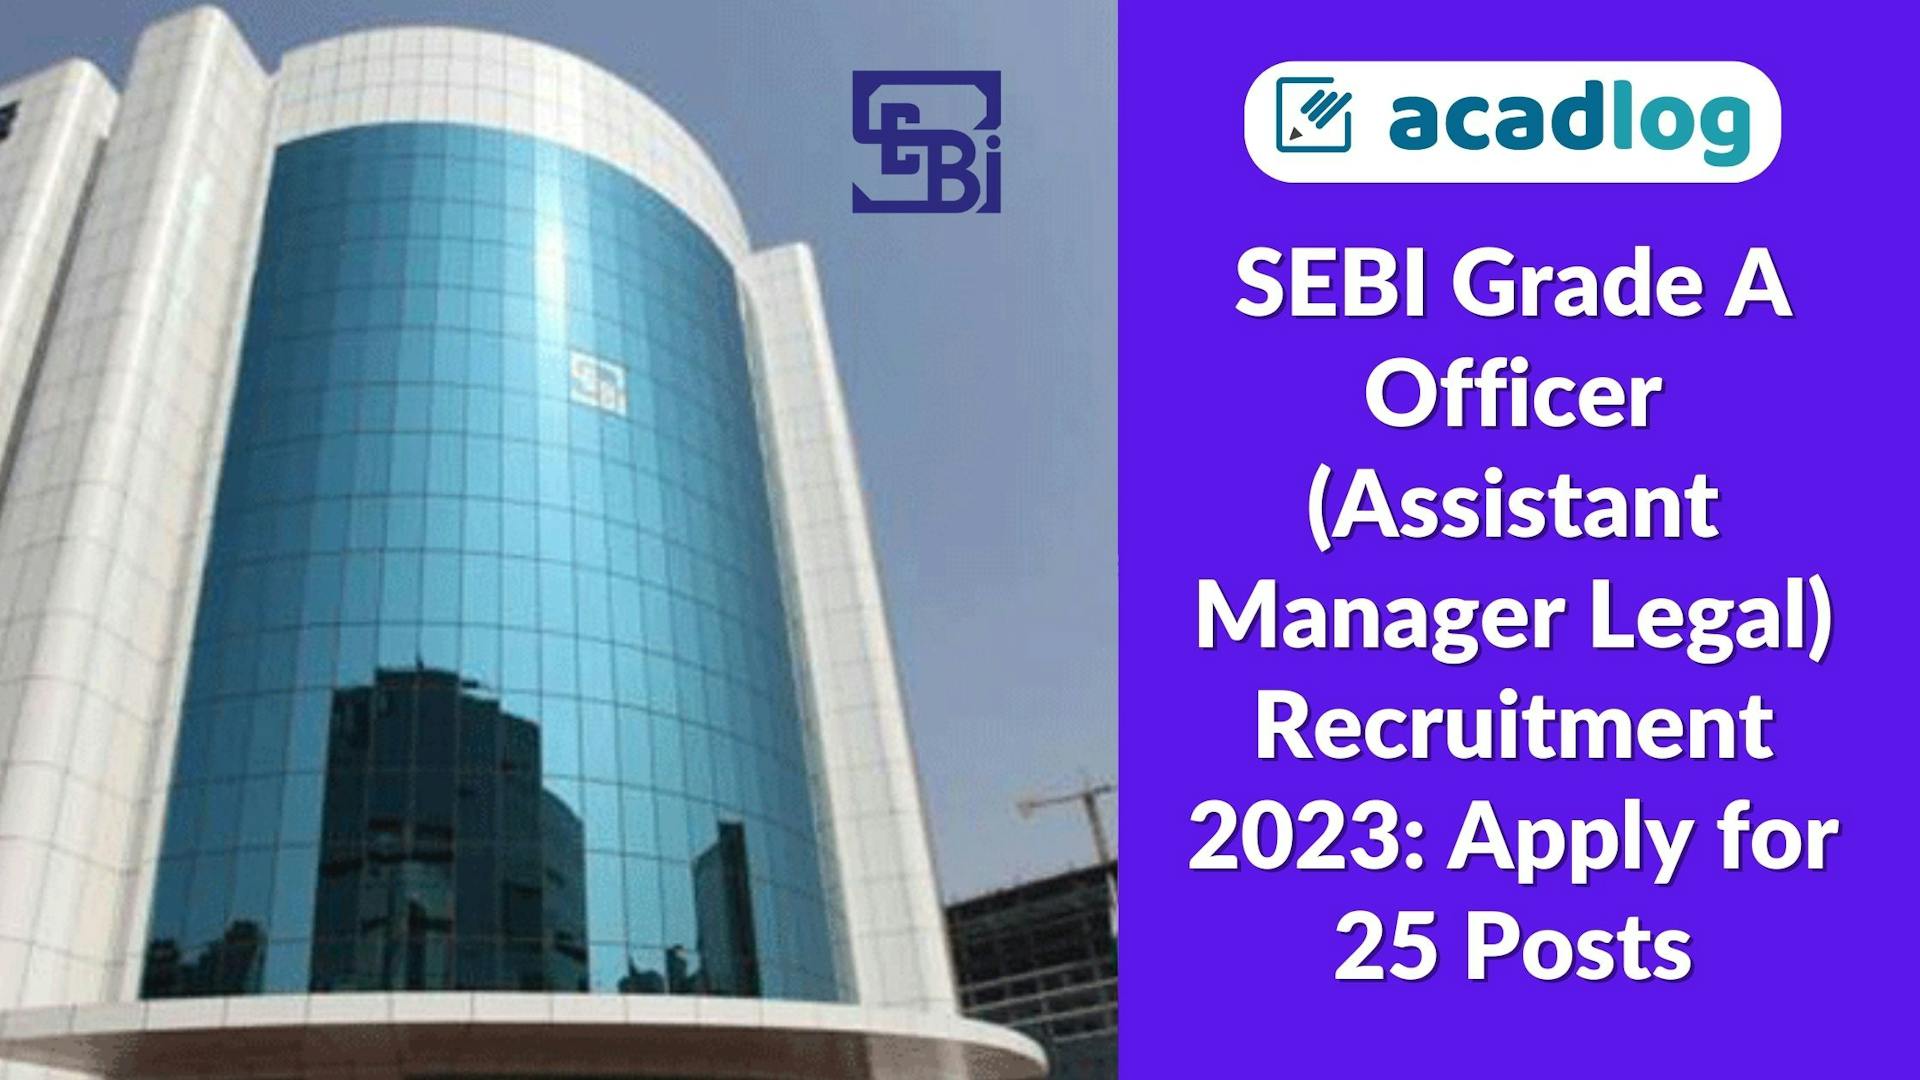 SEBI Grade A Officer (Assistant Manager Legal) Recruitment 2023: Apply for 25 Posts